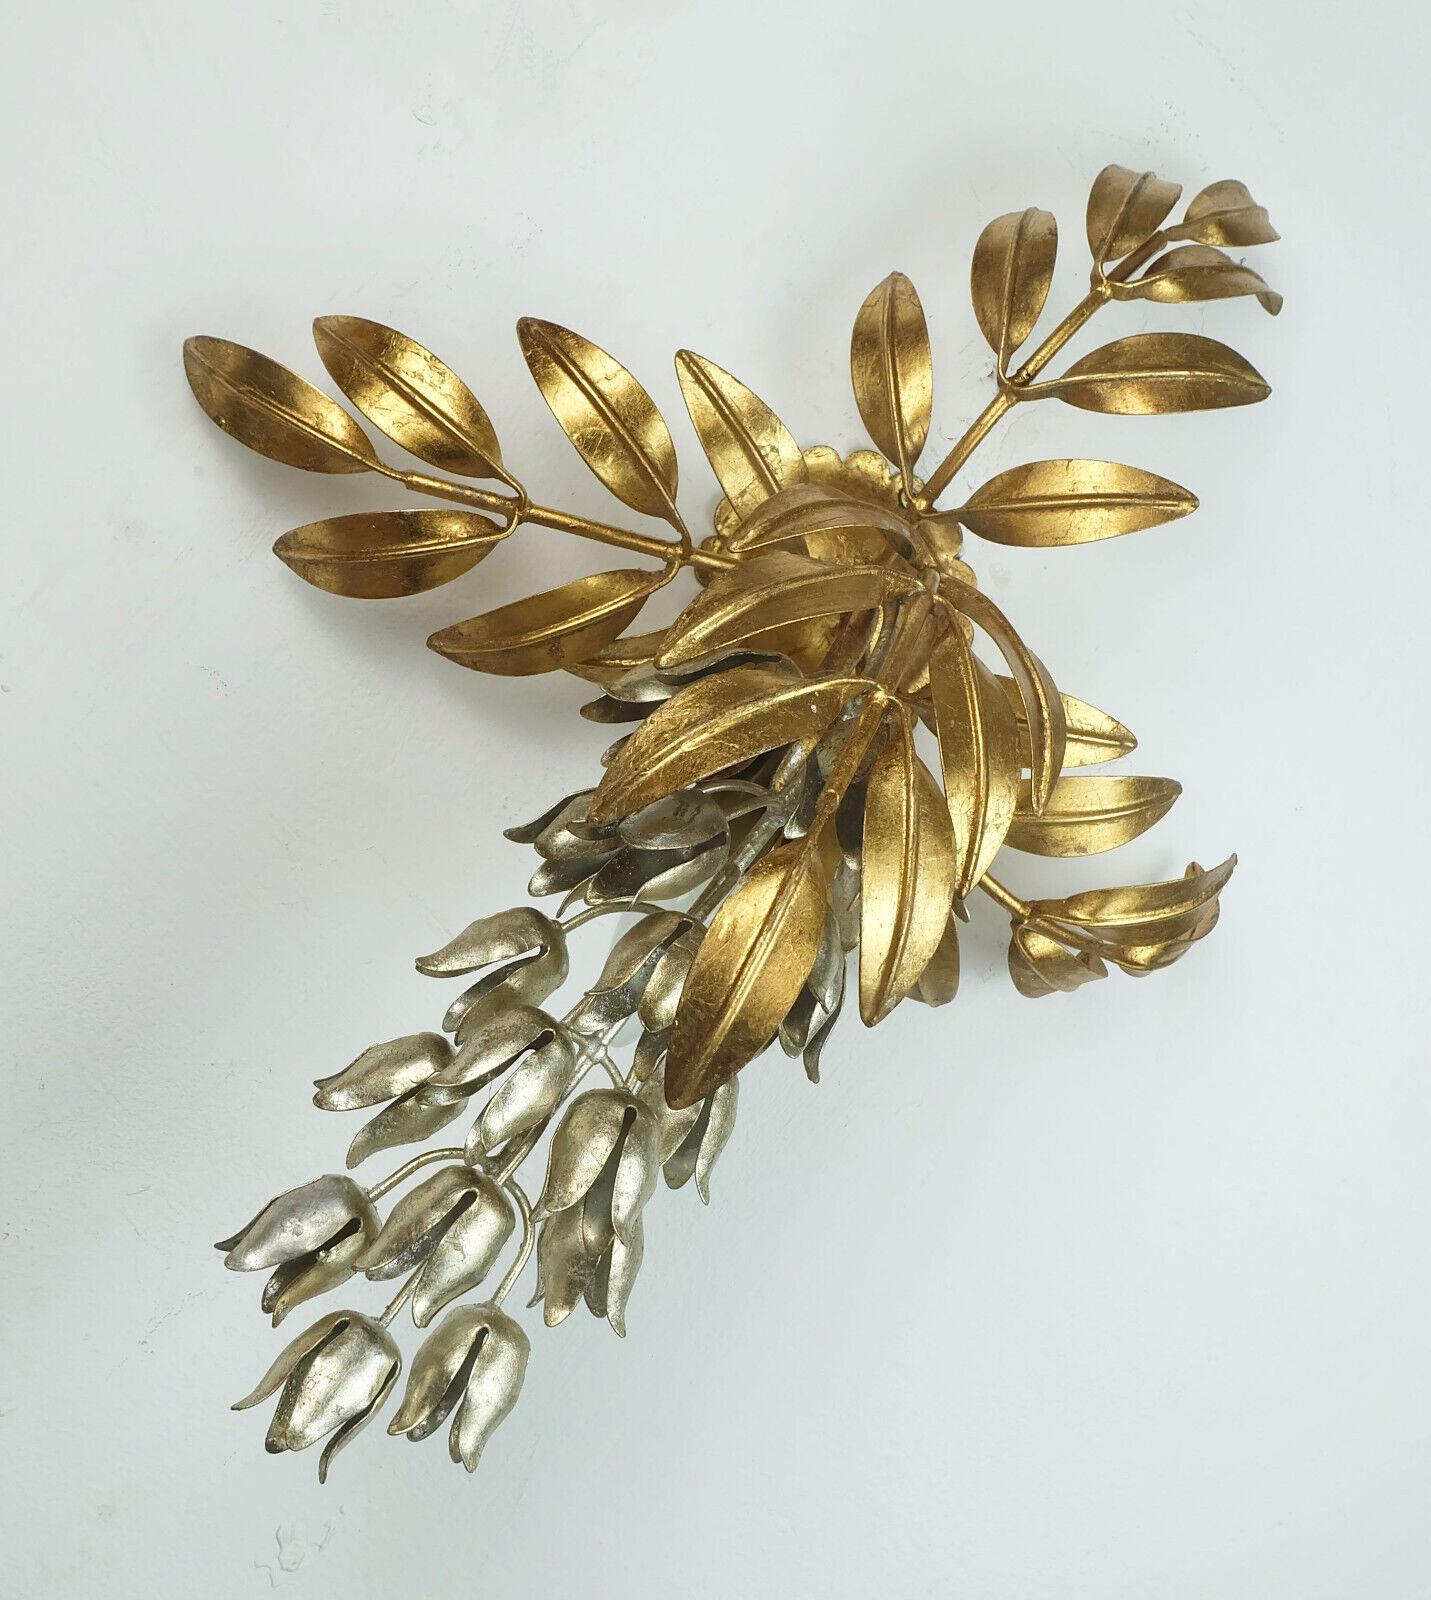 Very beautiful and decorative wall lamp by Hans Koegl (founded 1979). Ca. 1980s. Model pioggia d'oro. Stylized laburnum vine in gold and silver colored metal. Around 1970s. 1 socket for an E14 light bulb. 

Dimensions in cm:
Length 55 cm, width 40